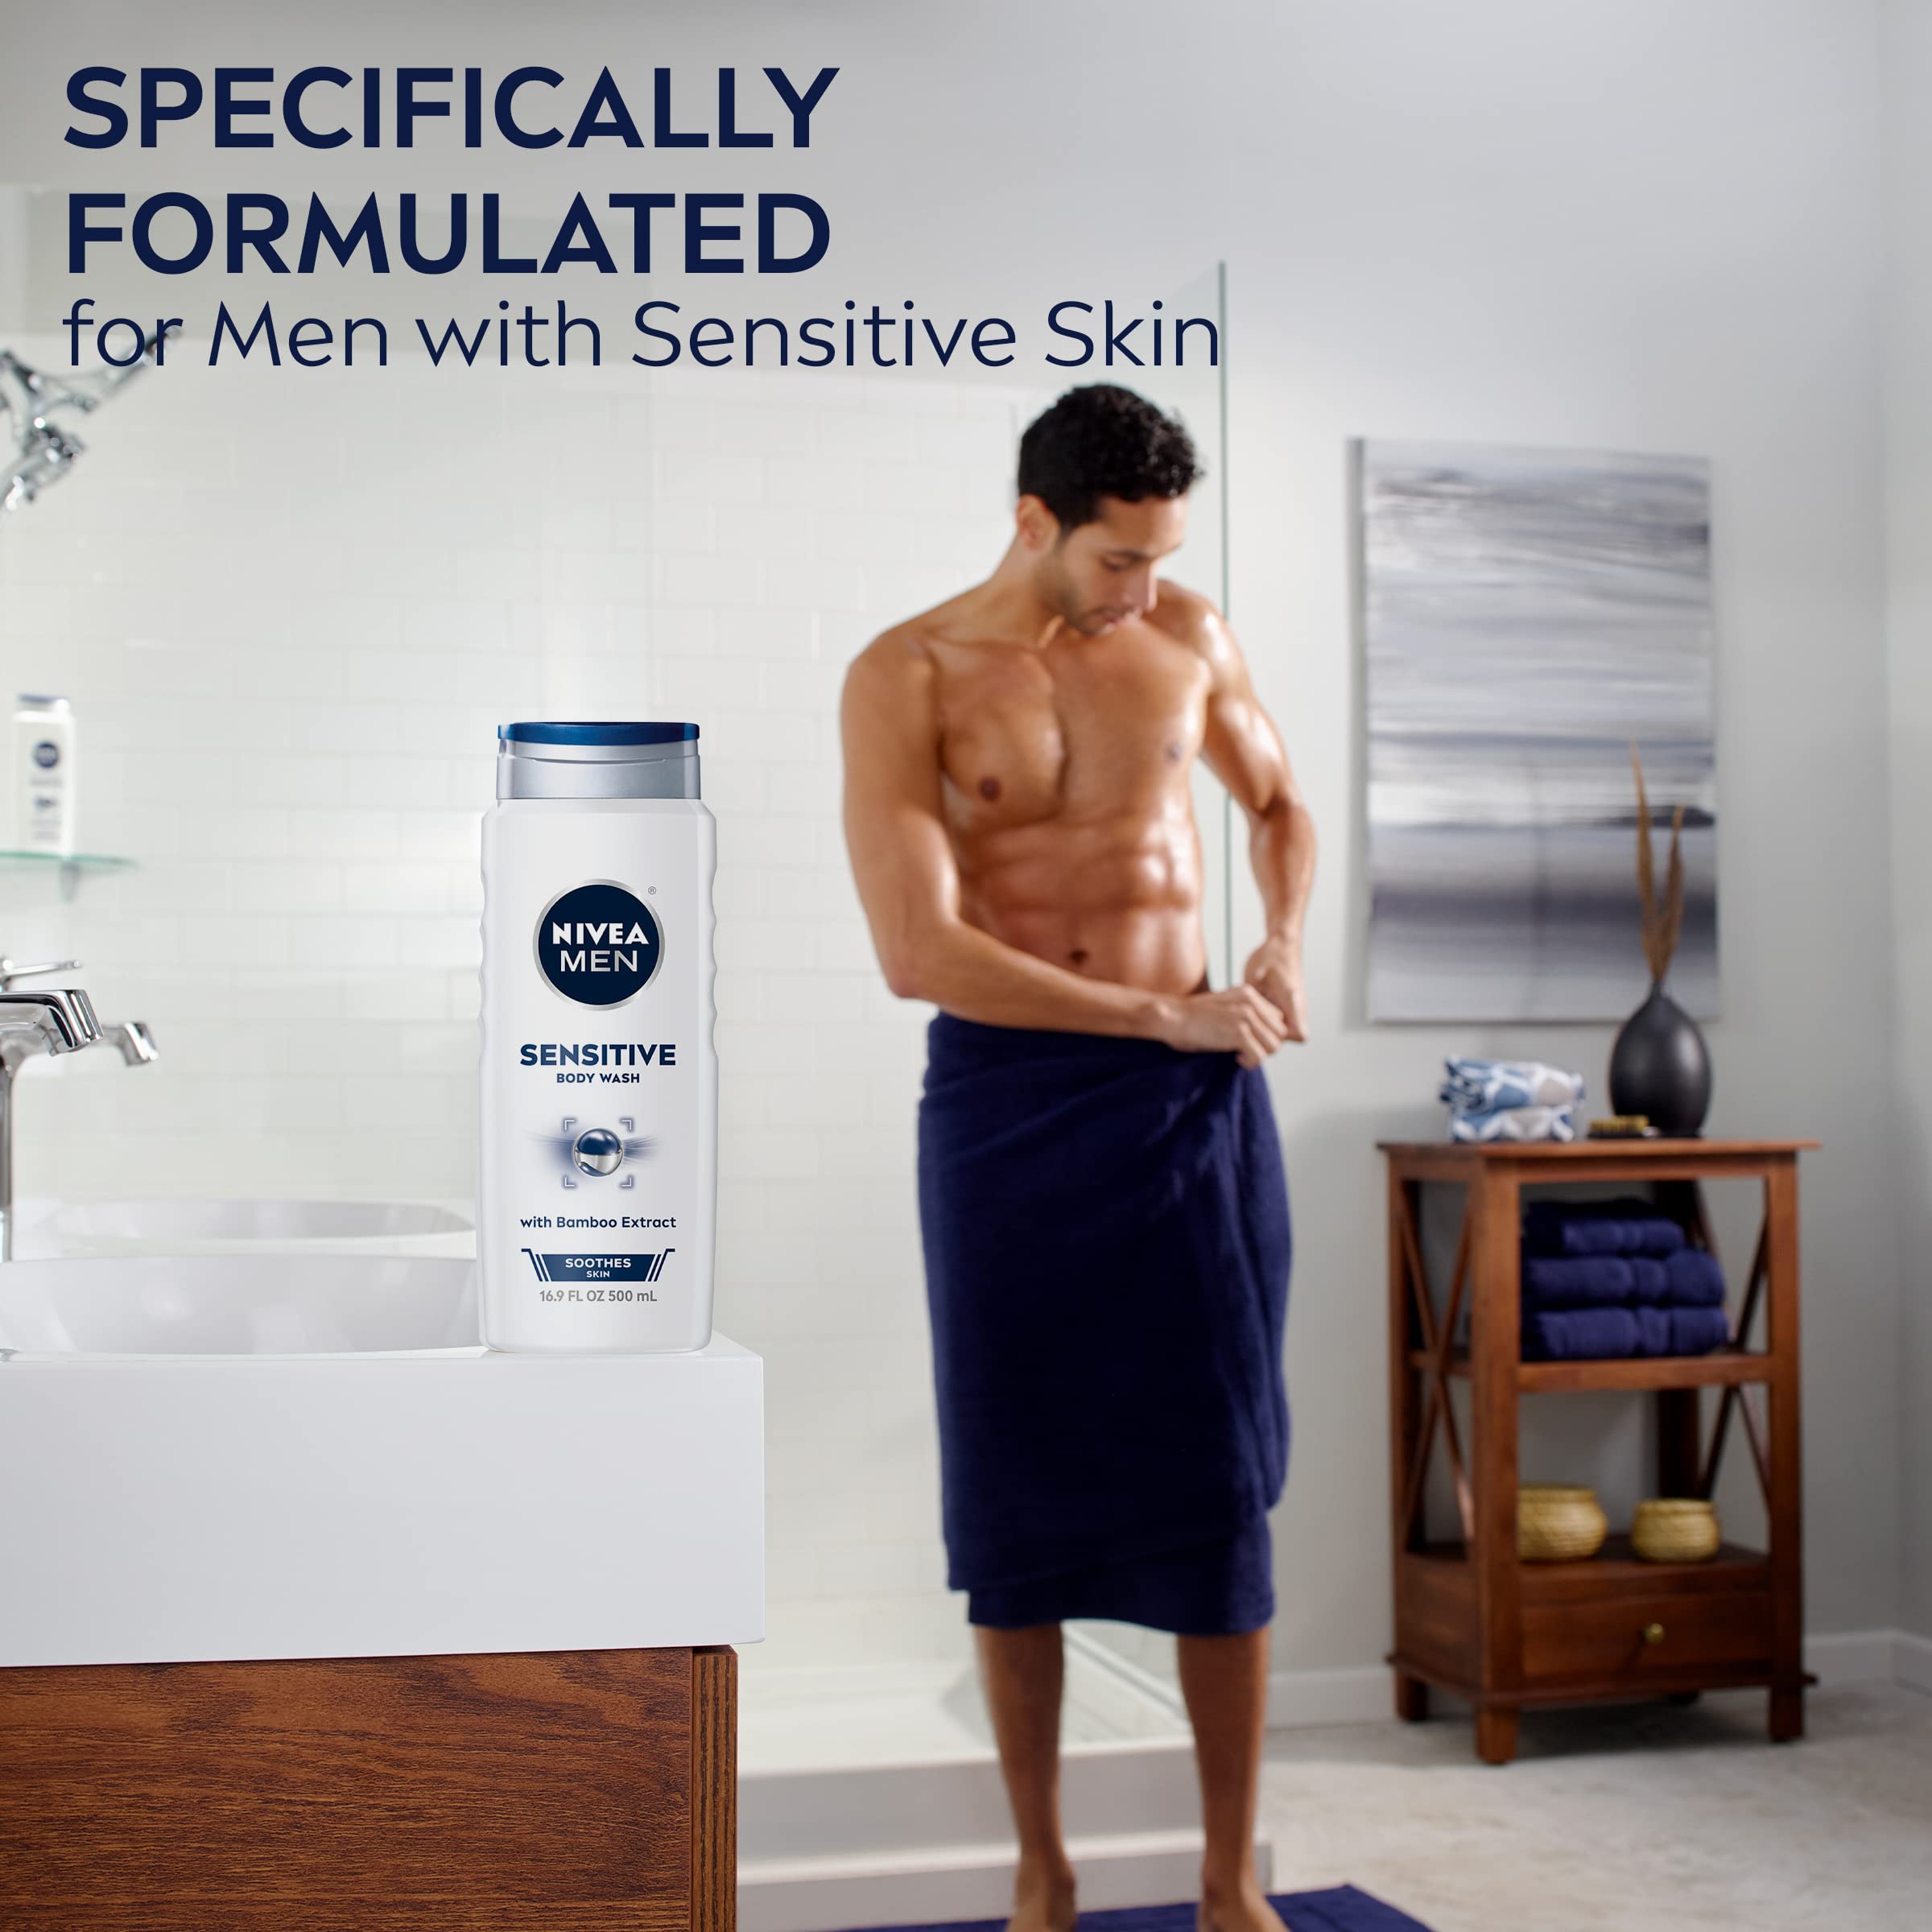 Nivea Men Sensitive Body Wash with Bamboo Extract, 3 Pack of 16.9 Fl Oz Bottles